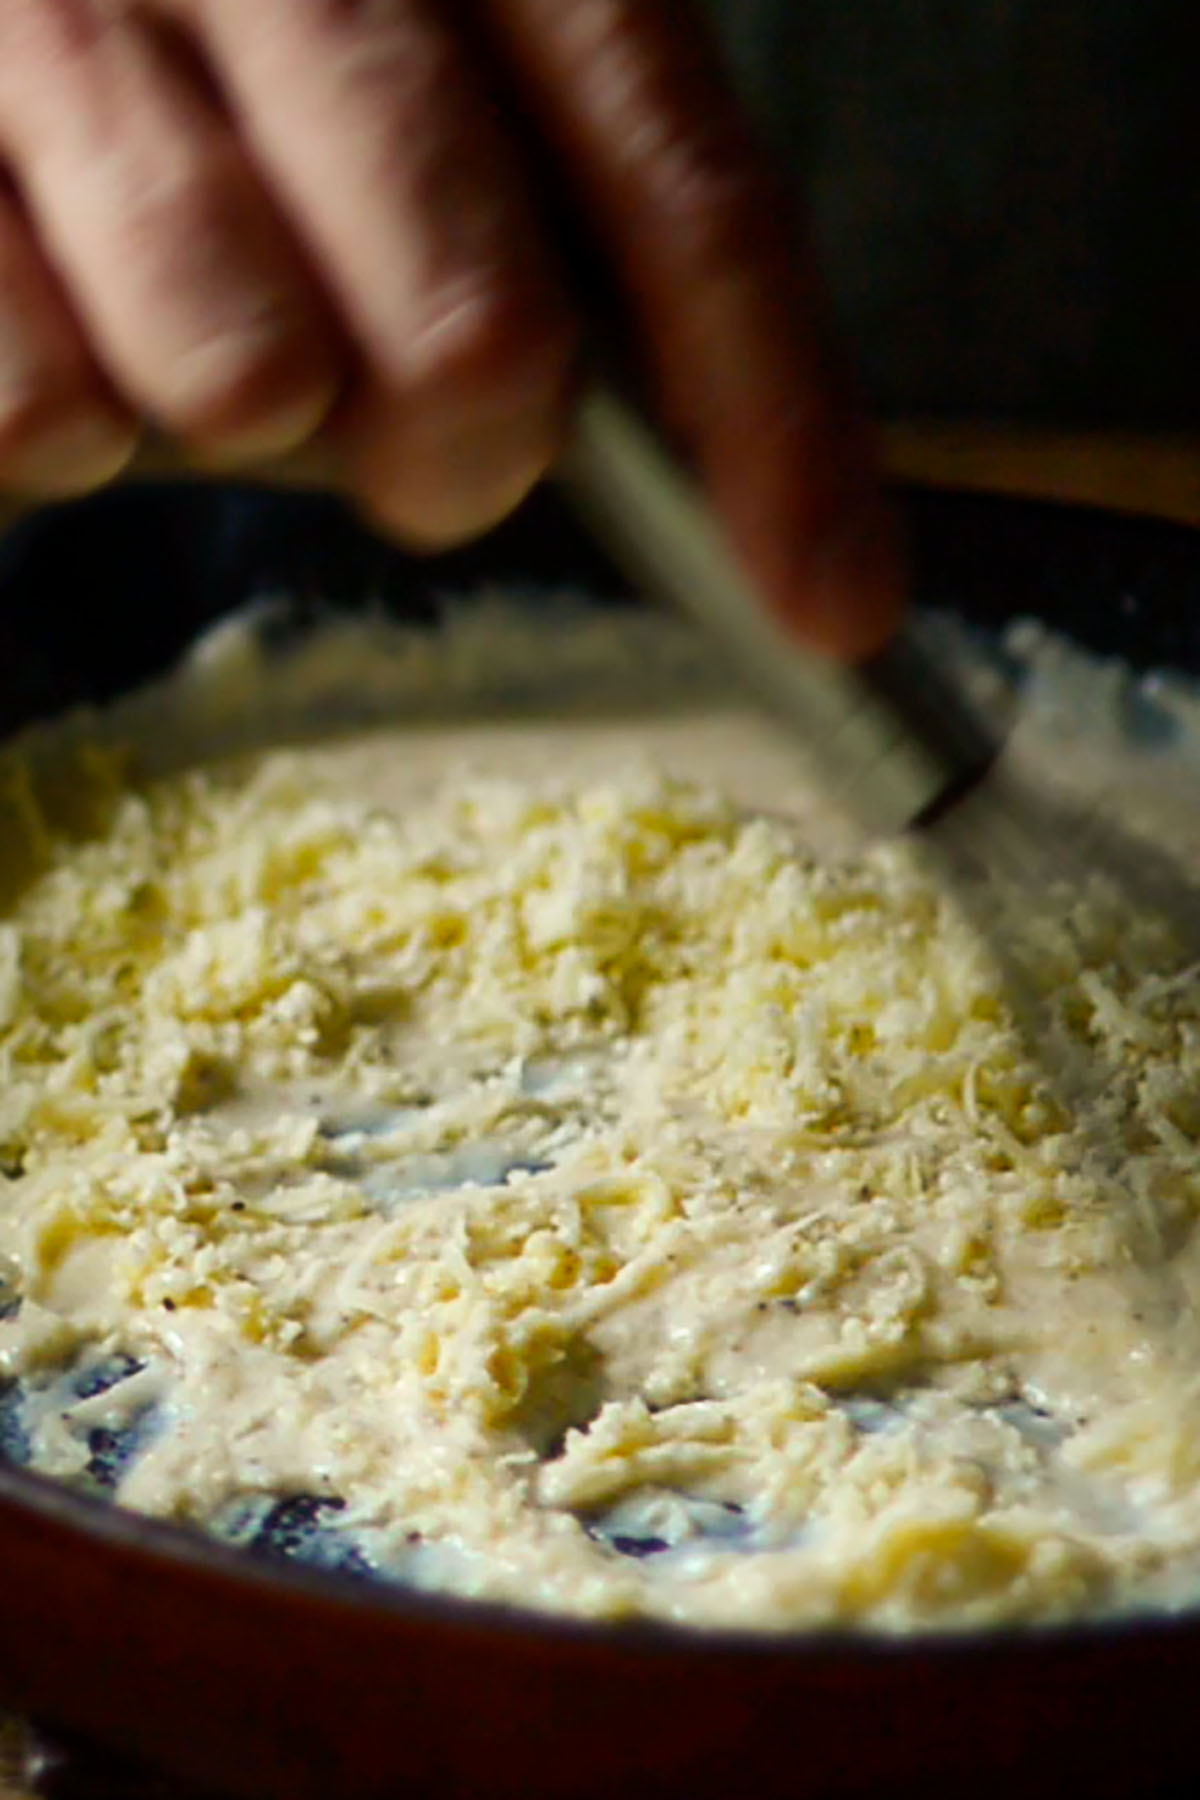 Freshly shredded cheese being folded into Mornay sauce in a cast iron skillet.